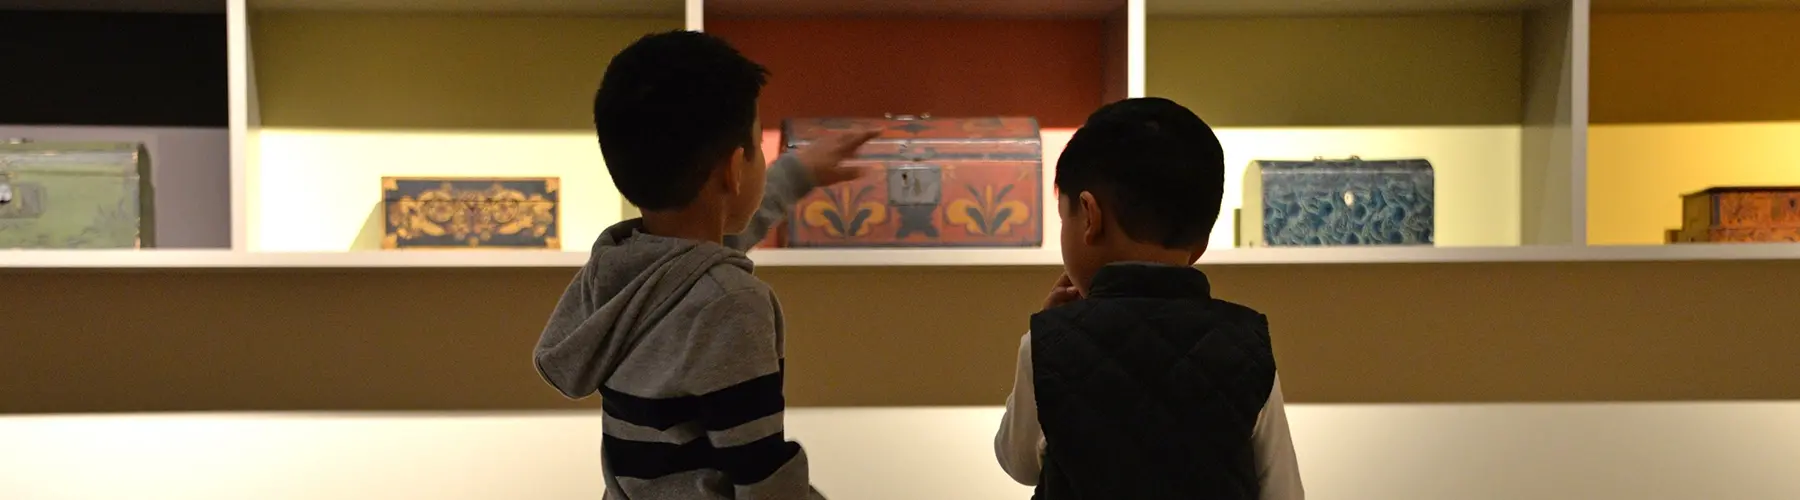 two boys looking at art boxes